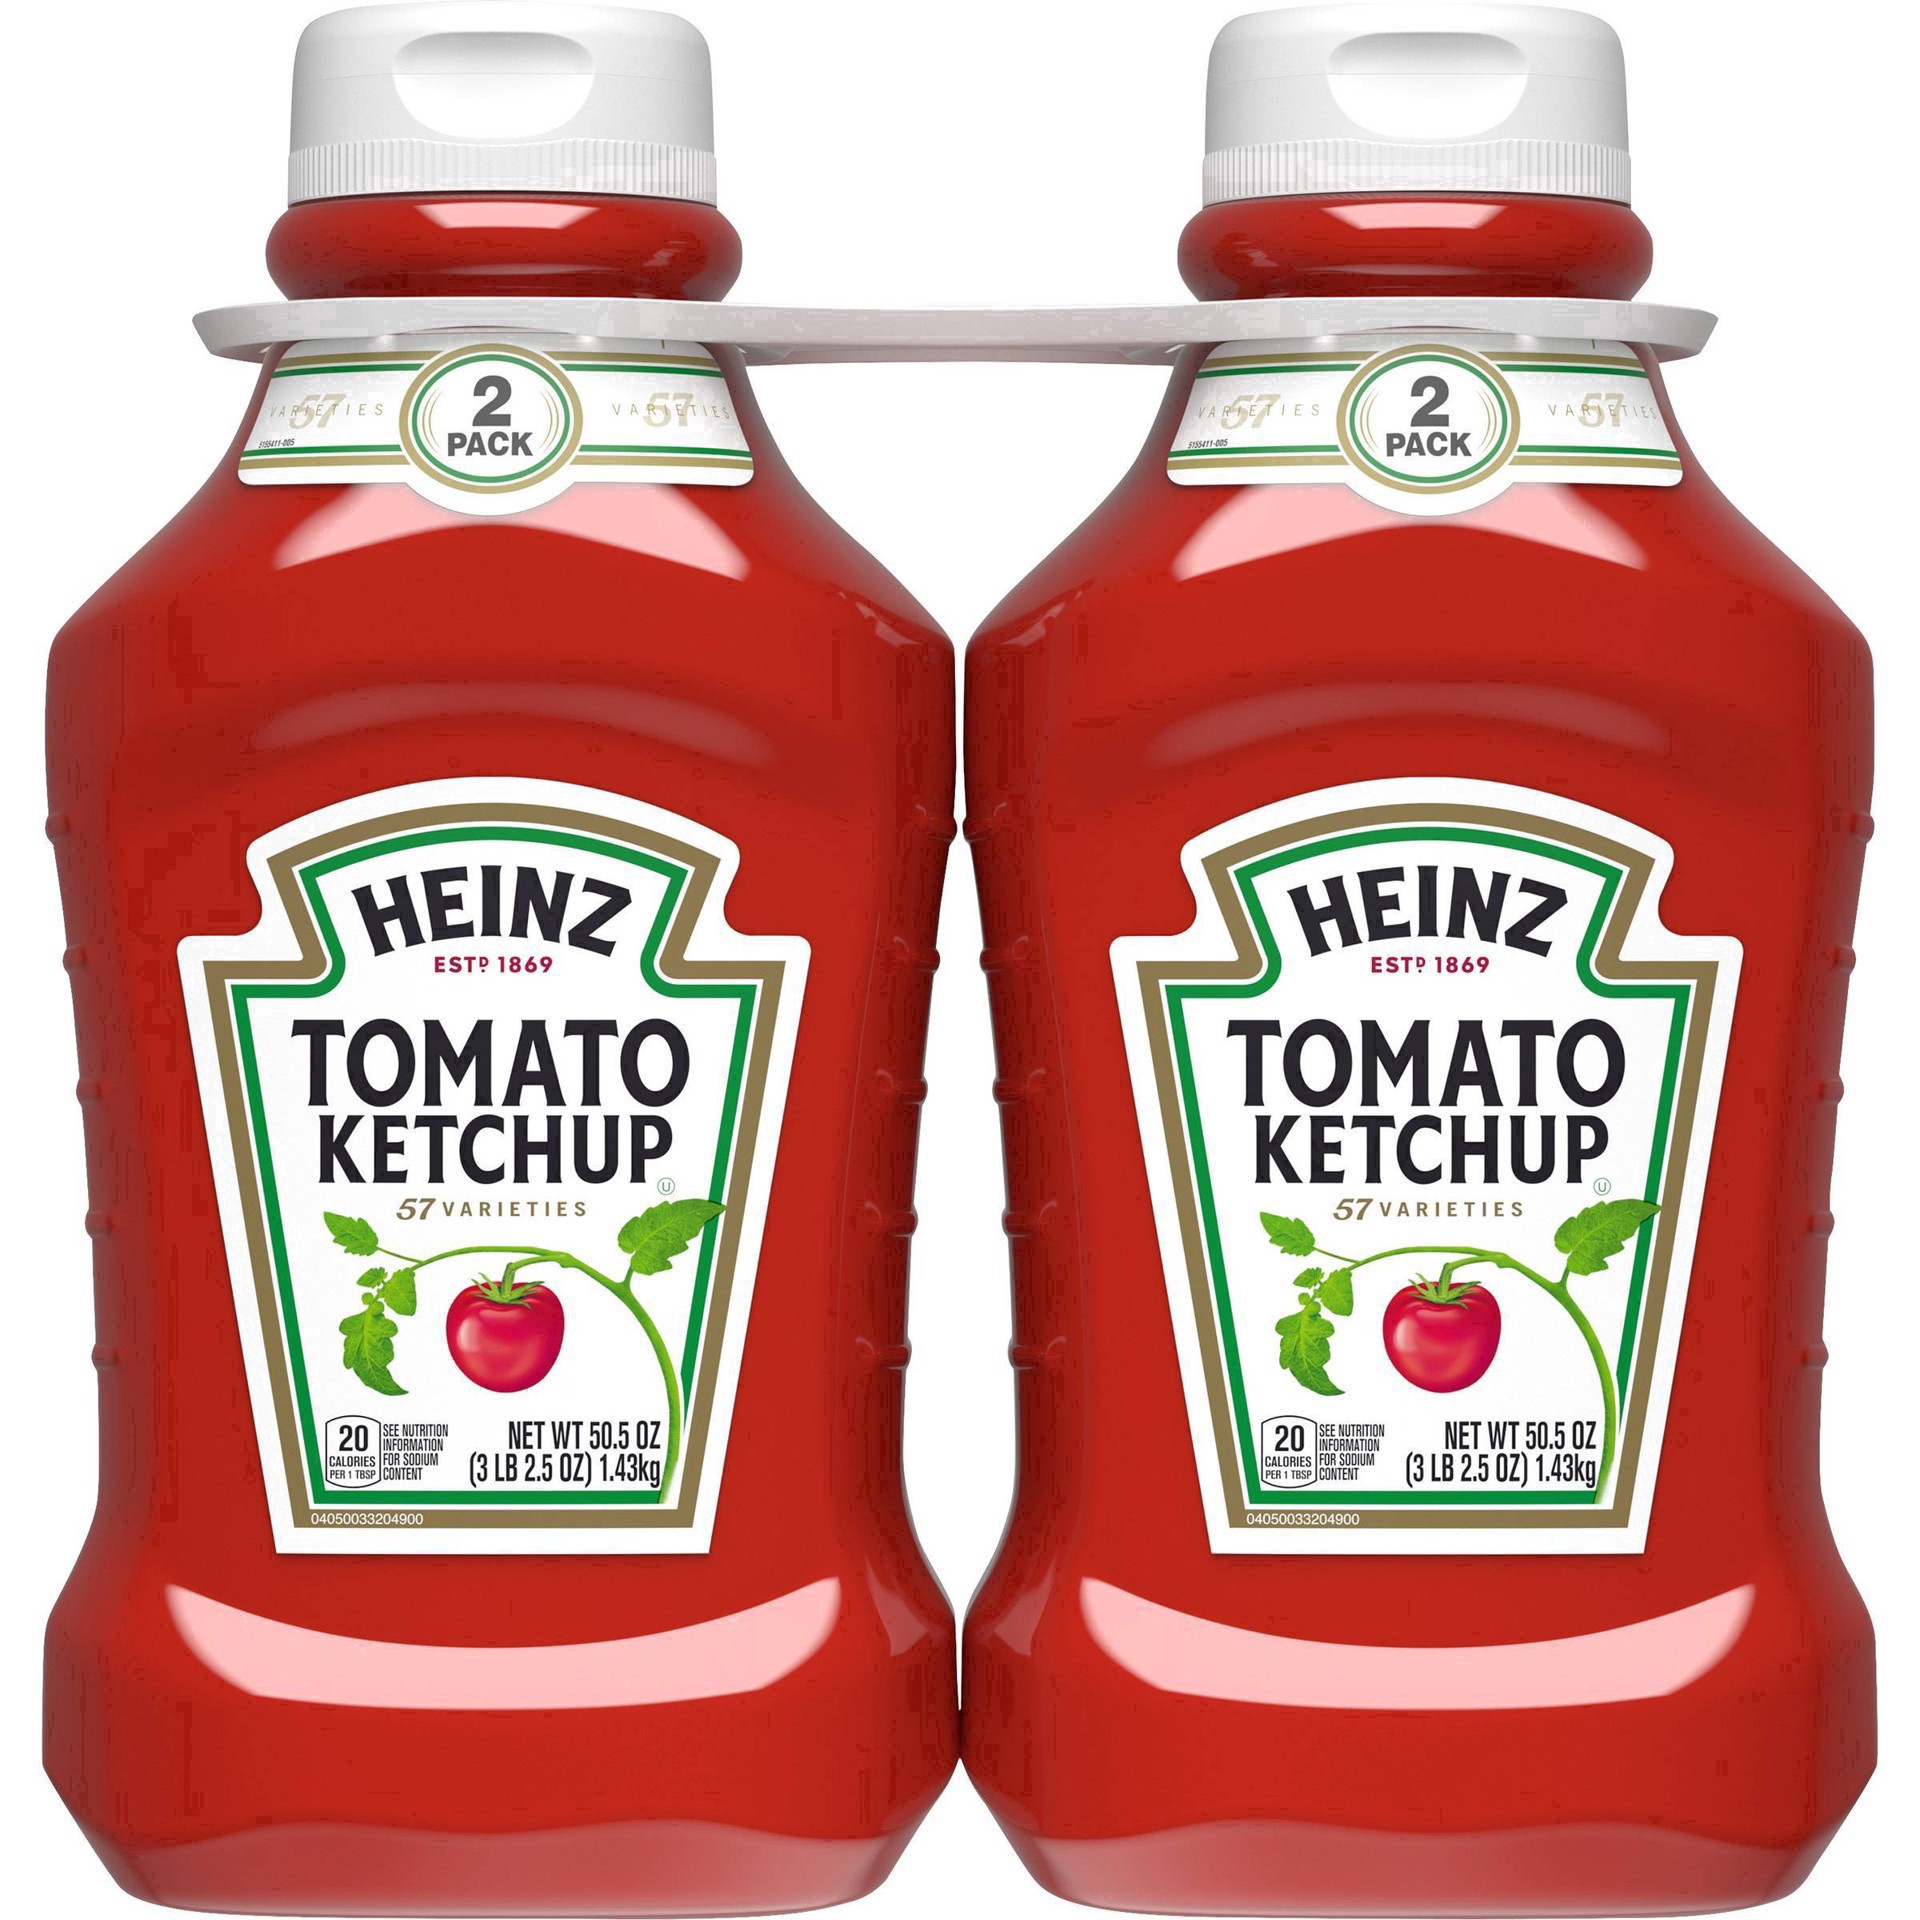 slide 107 of 127, Heinz Tomato Ketchup Pack, 2 ct; 50.5 oz